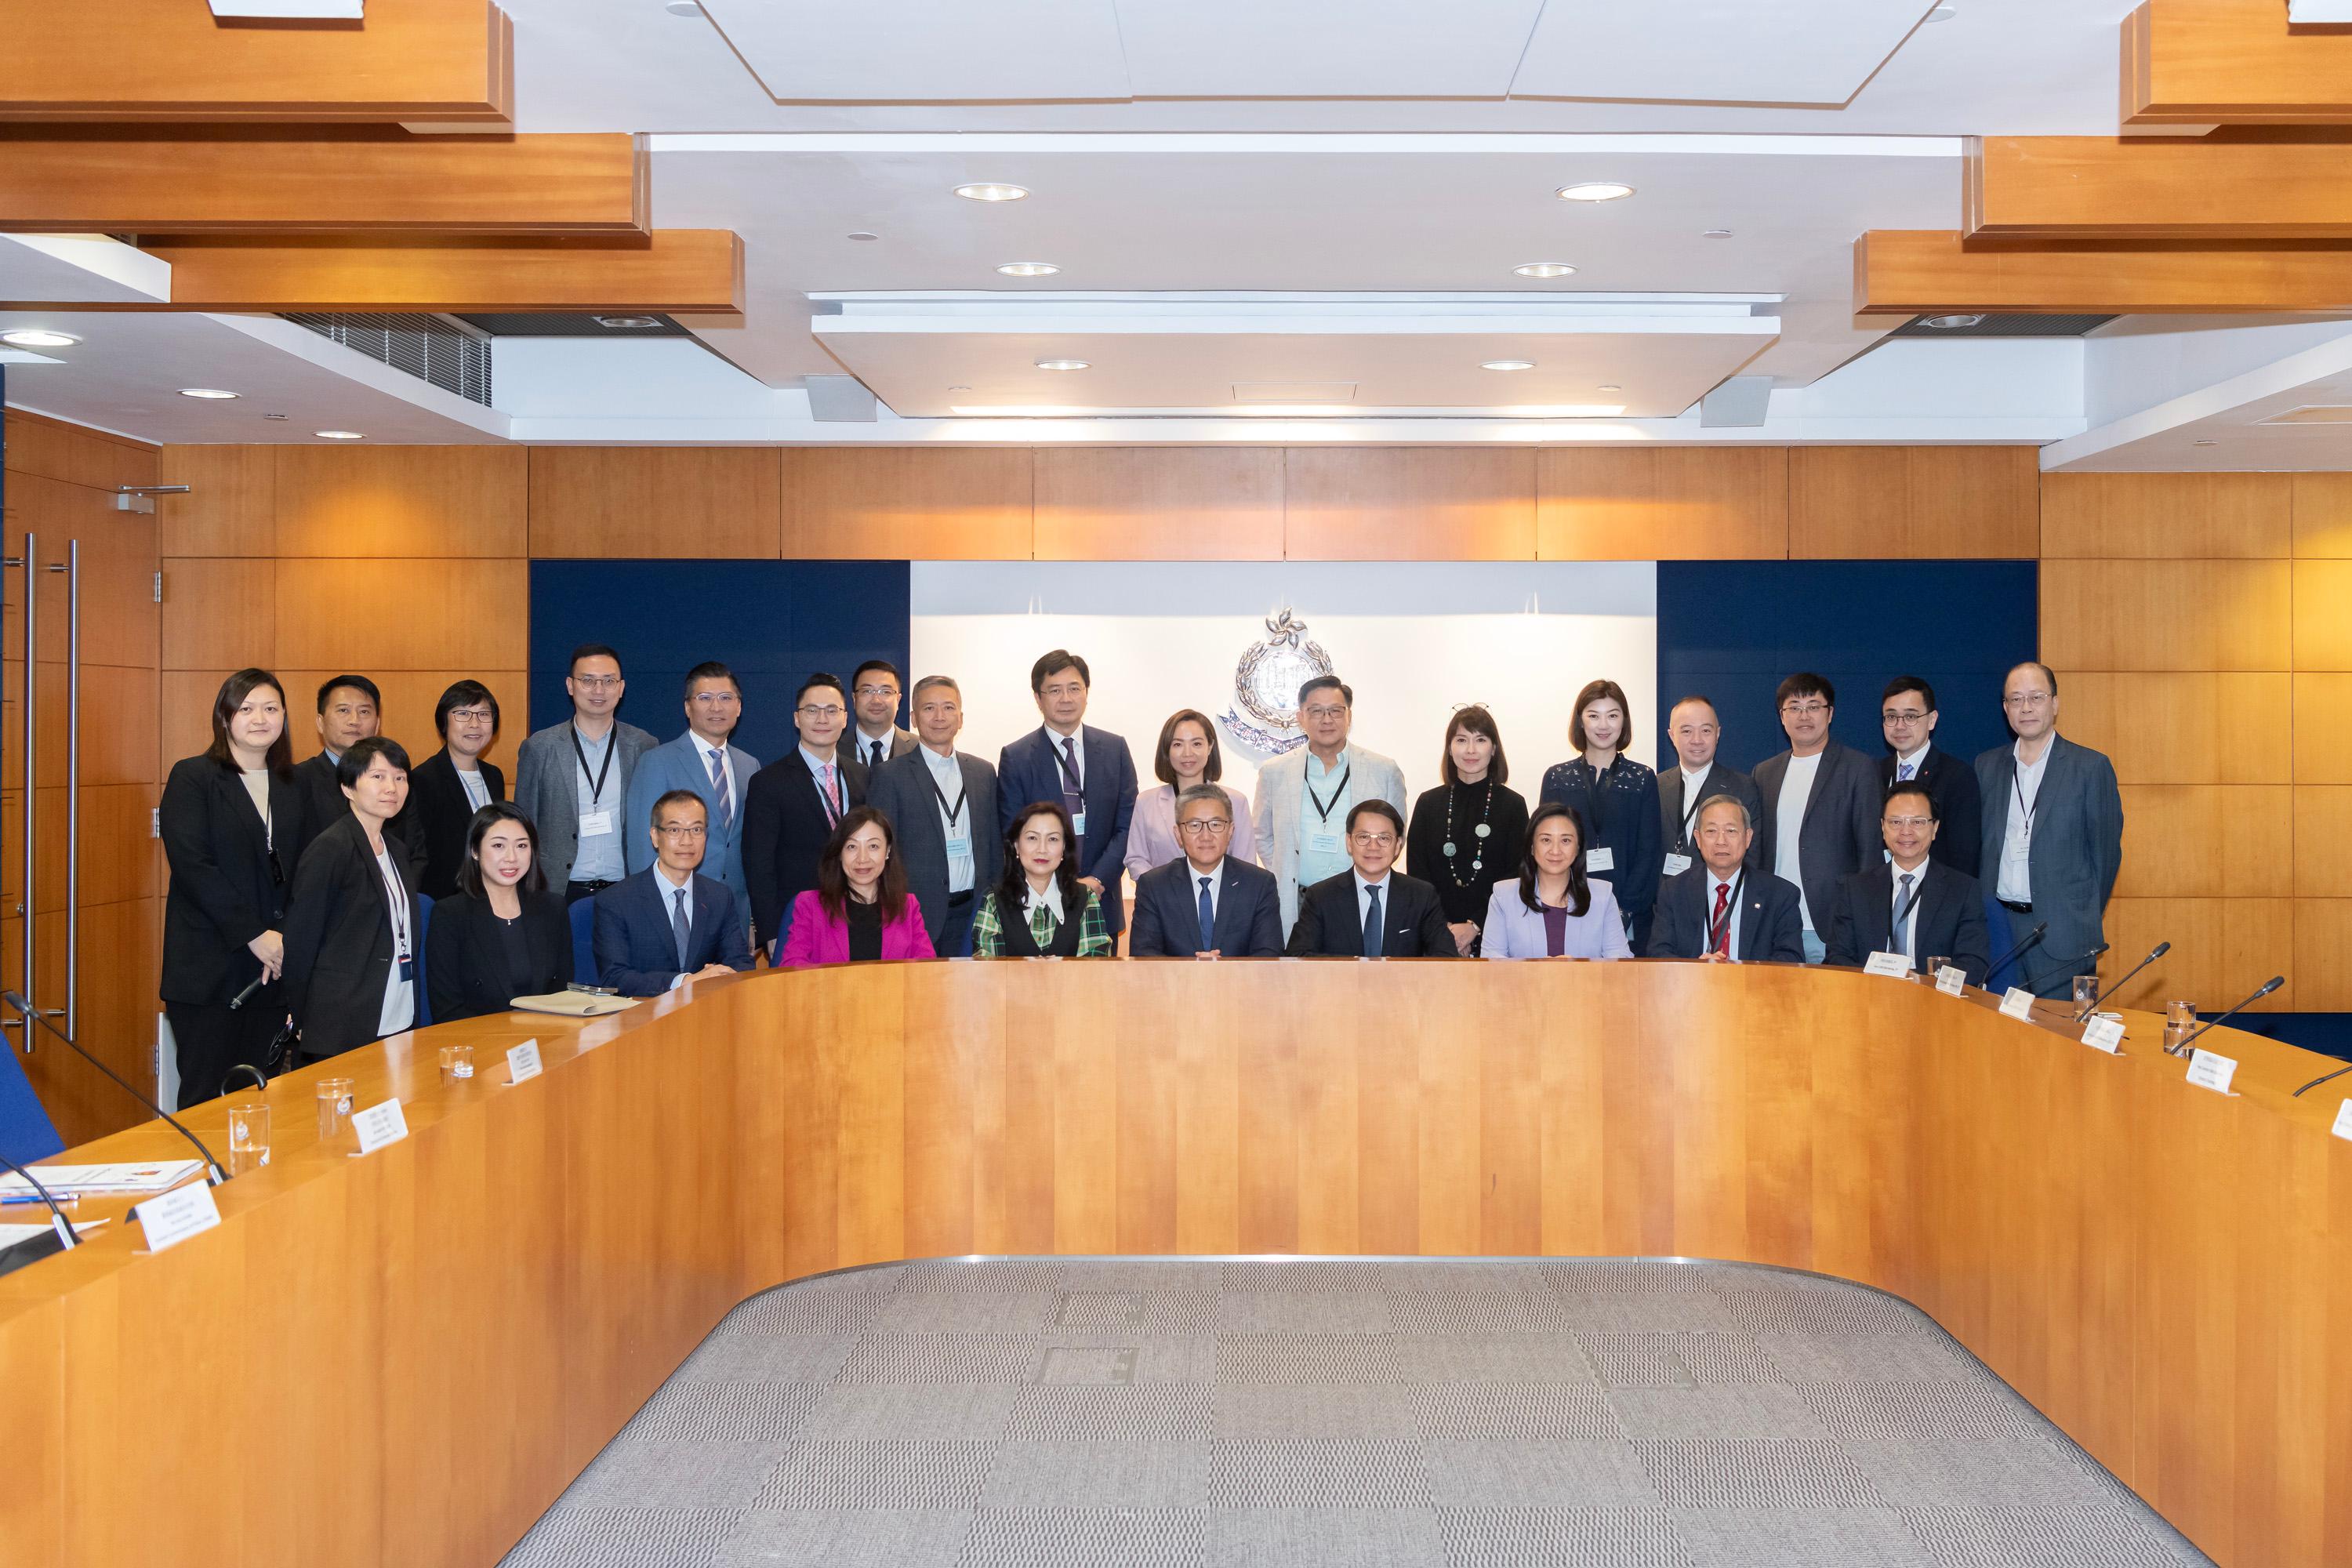 The Legislative Council Panel on Security visits the Anti-Deception Coordination Centre and the Anti-Deception Alliance of the Hong Kong Police Force today (April 23).  Photo shows the Chairman of the Panel on Security, Mr Chan Hak-kan (front row, fourth right); Deputy Chairman, Ms Carmen Kan (front row, sixth right); other Members and the Commissioner of Police, Mr Siu Chak-yee (front row, fifth right), posing for a group photo.